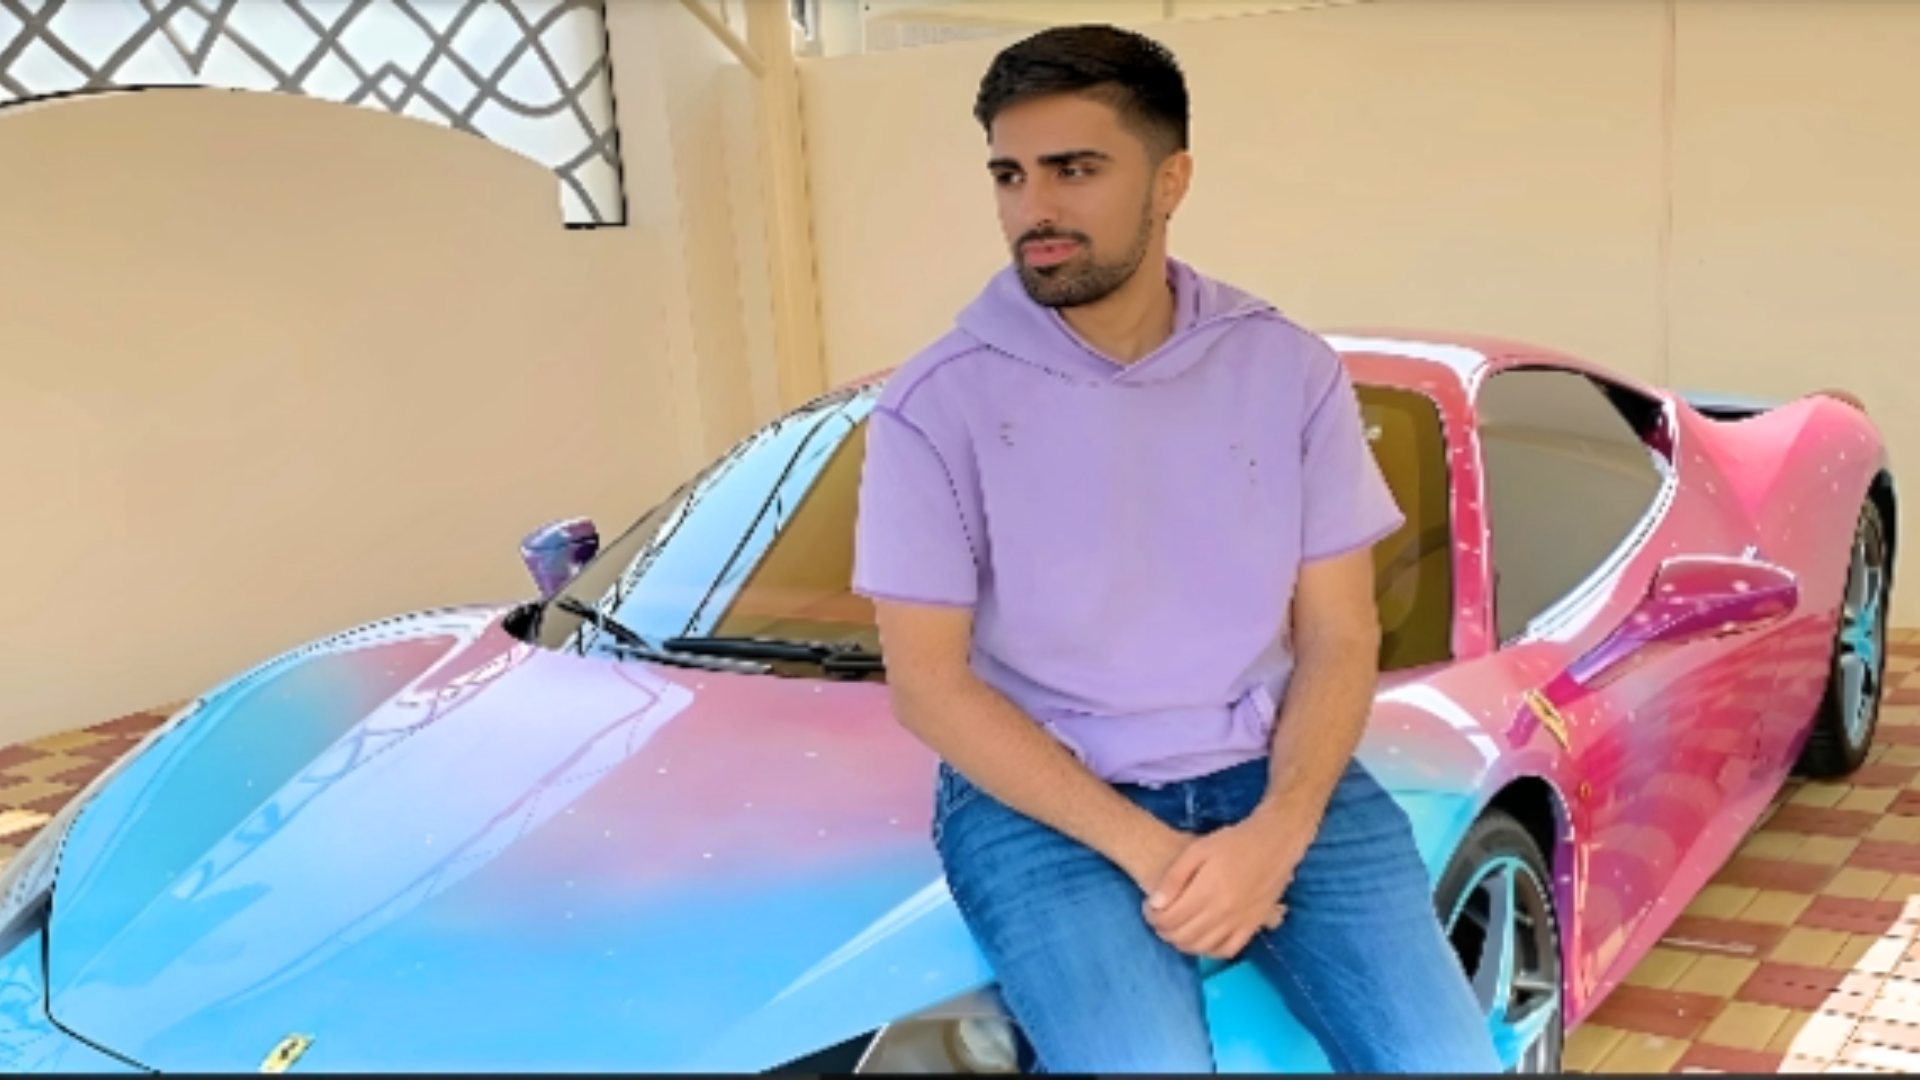 Mo Vlogs wearing purple color shirt and blue pant, smiling with car at background, depicting Mo Vlogs Net Worth: How Rich is YouTuber?